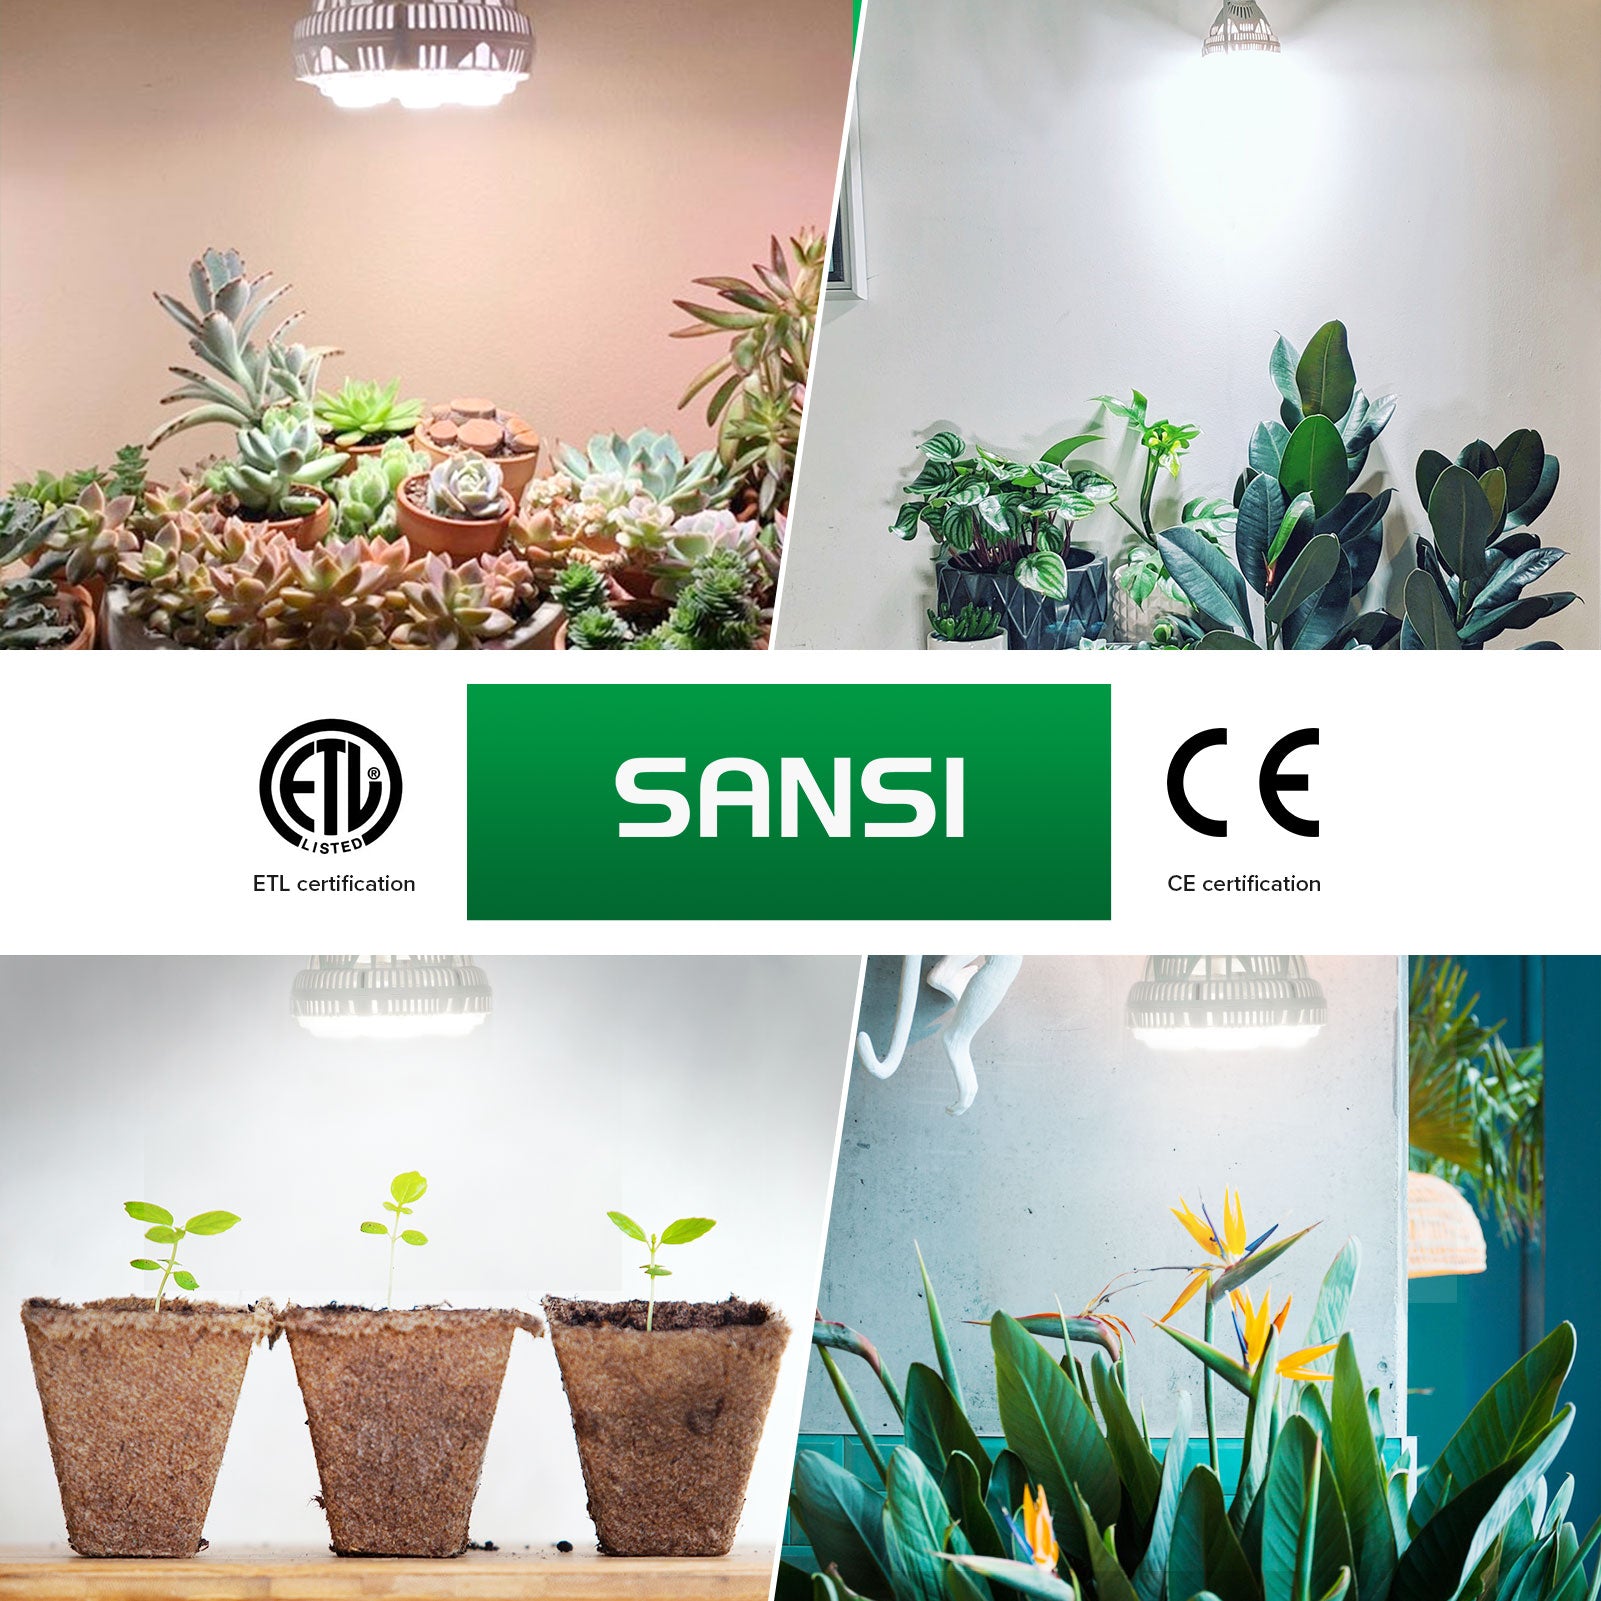 24W led grow light bulb with white light, suitable for high light and medium light indoor plants has ETL and CE certification